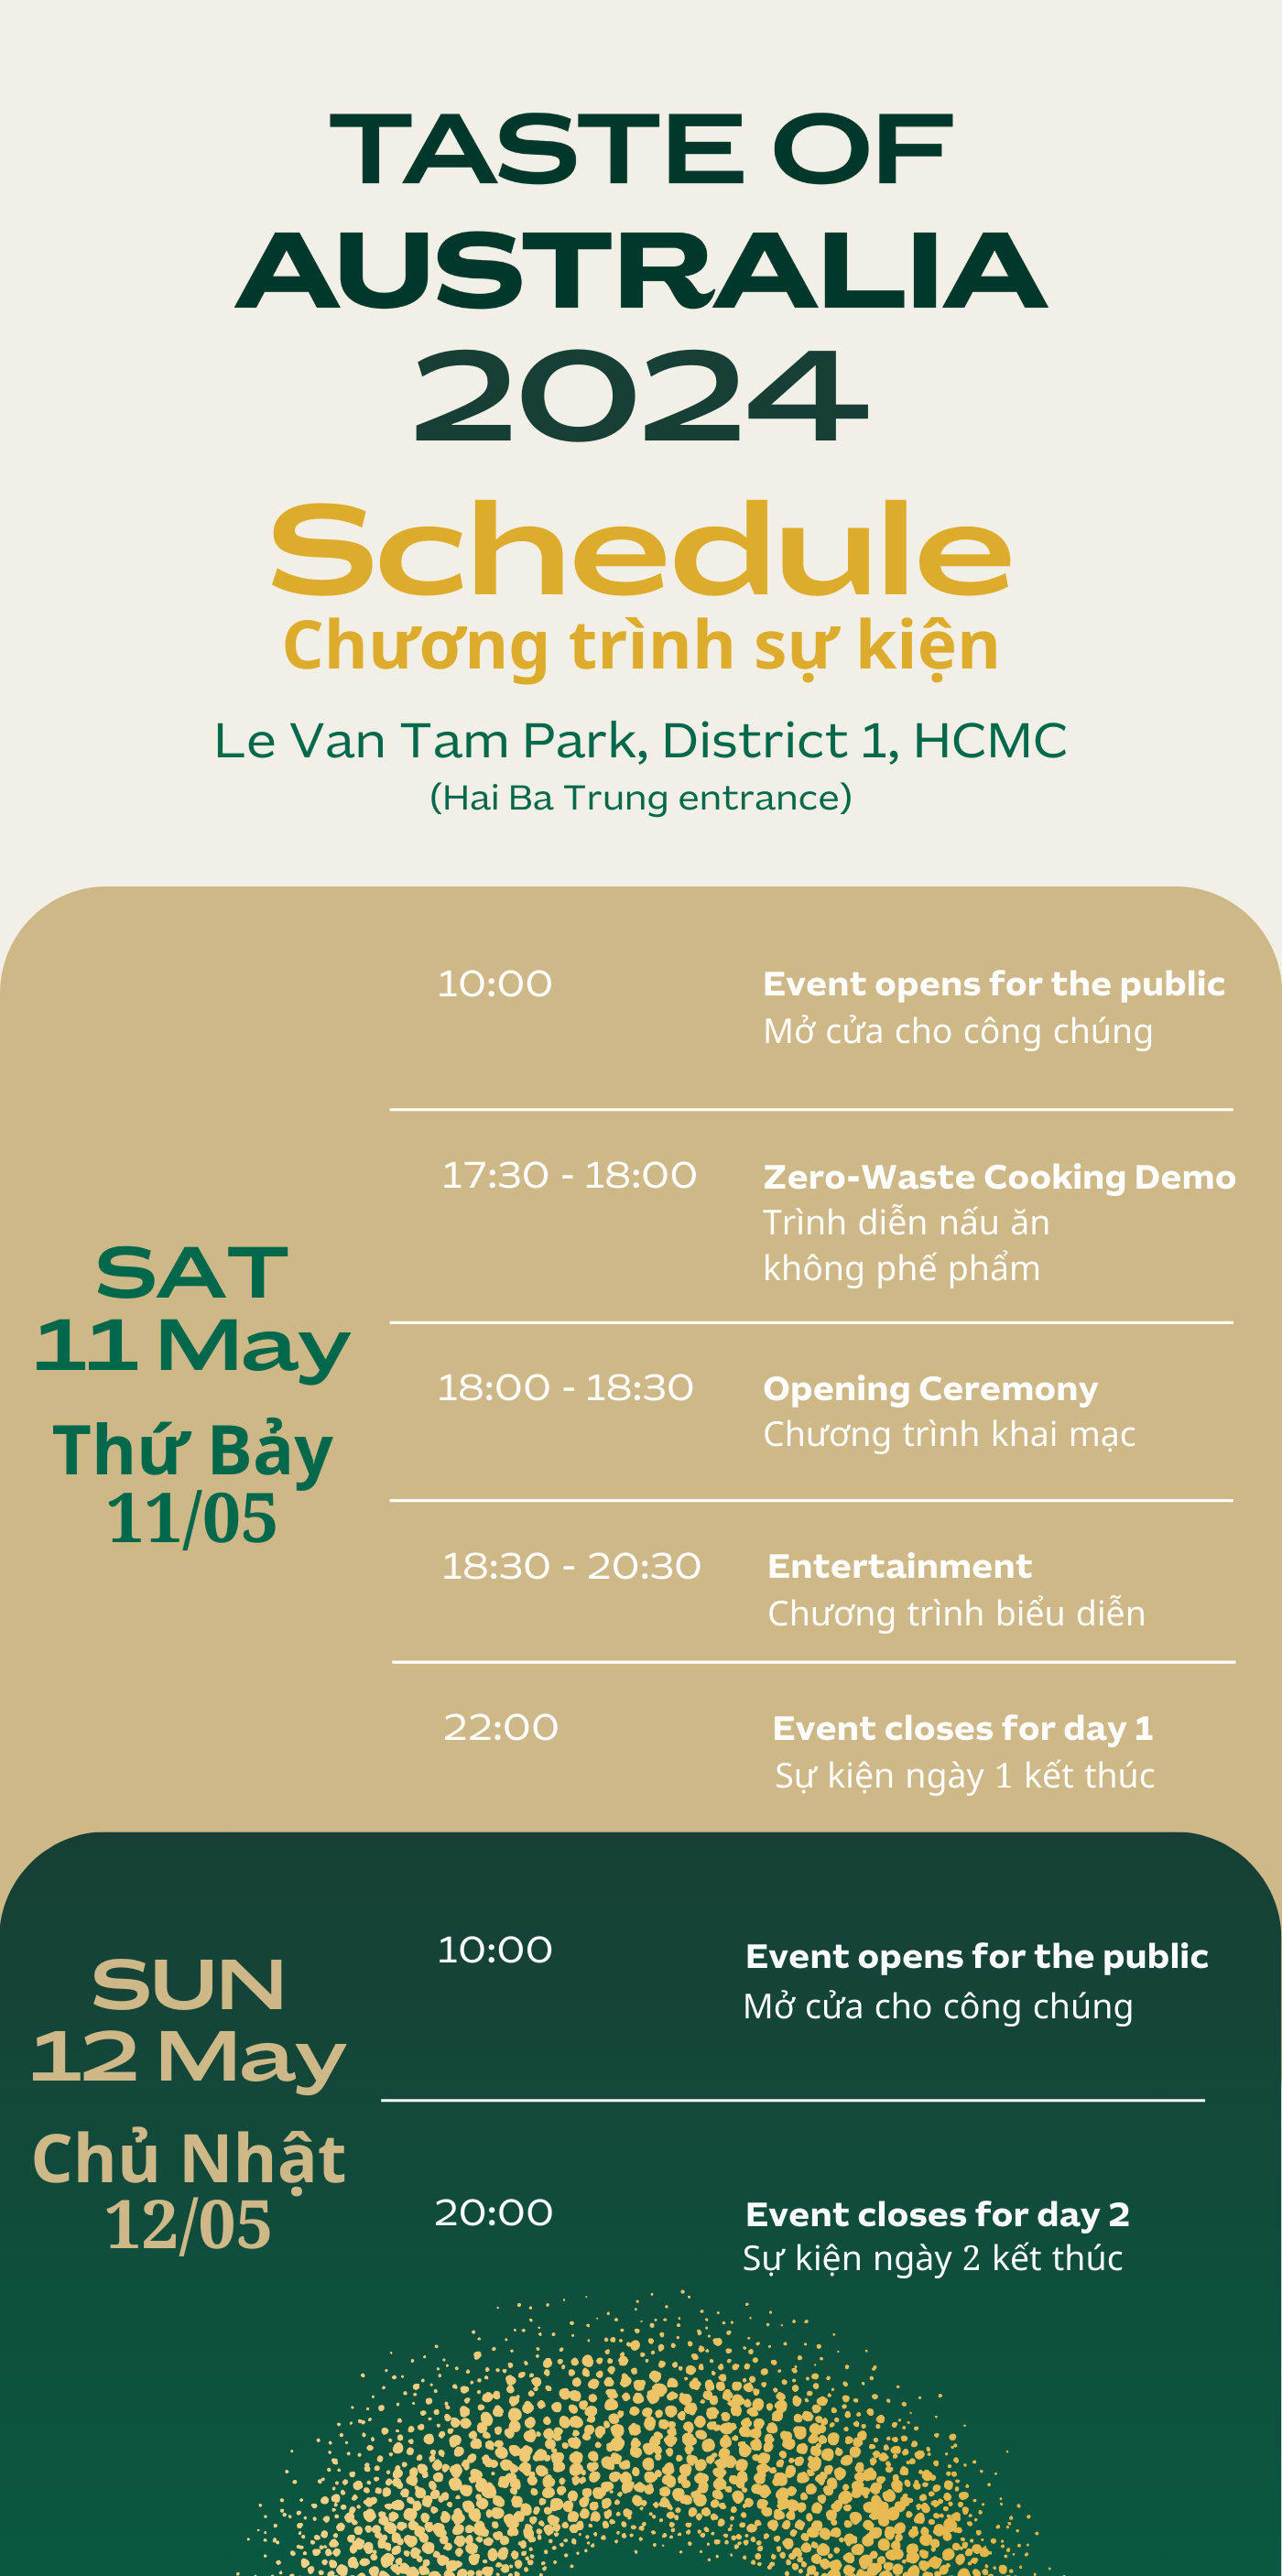 Detailed schedule of the two day Taste of Australia 2024 in Ho Chi Minh City on MAy 11 and 12 released by the Australian Consulate-General in Ho Chi Minh City.